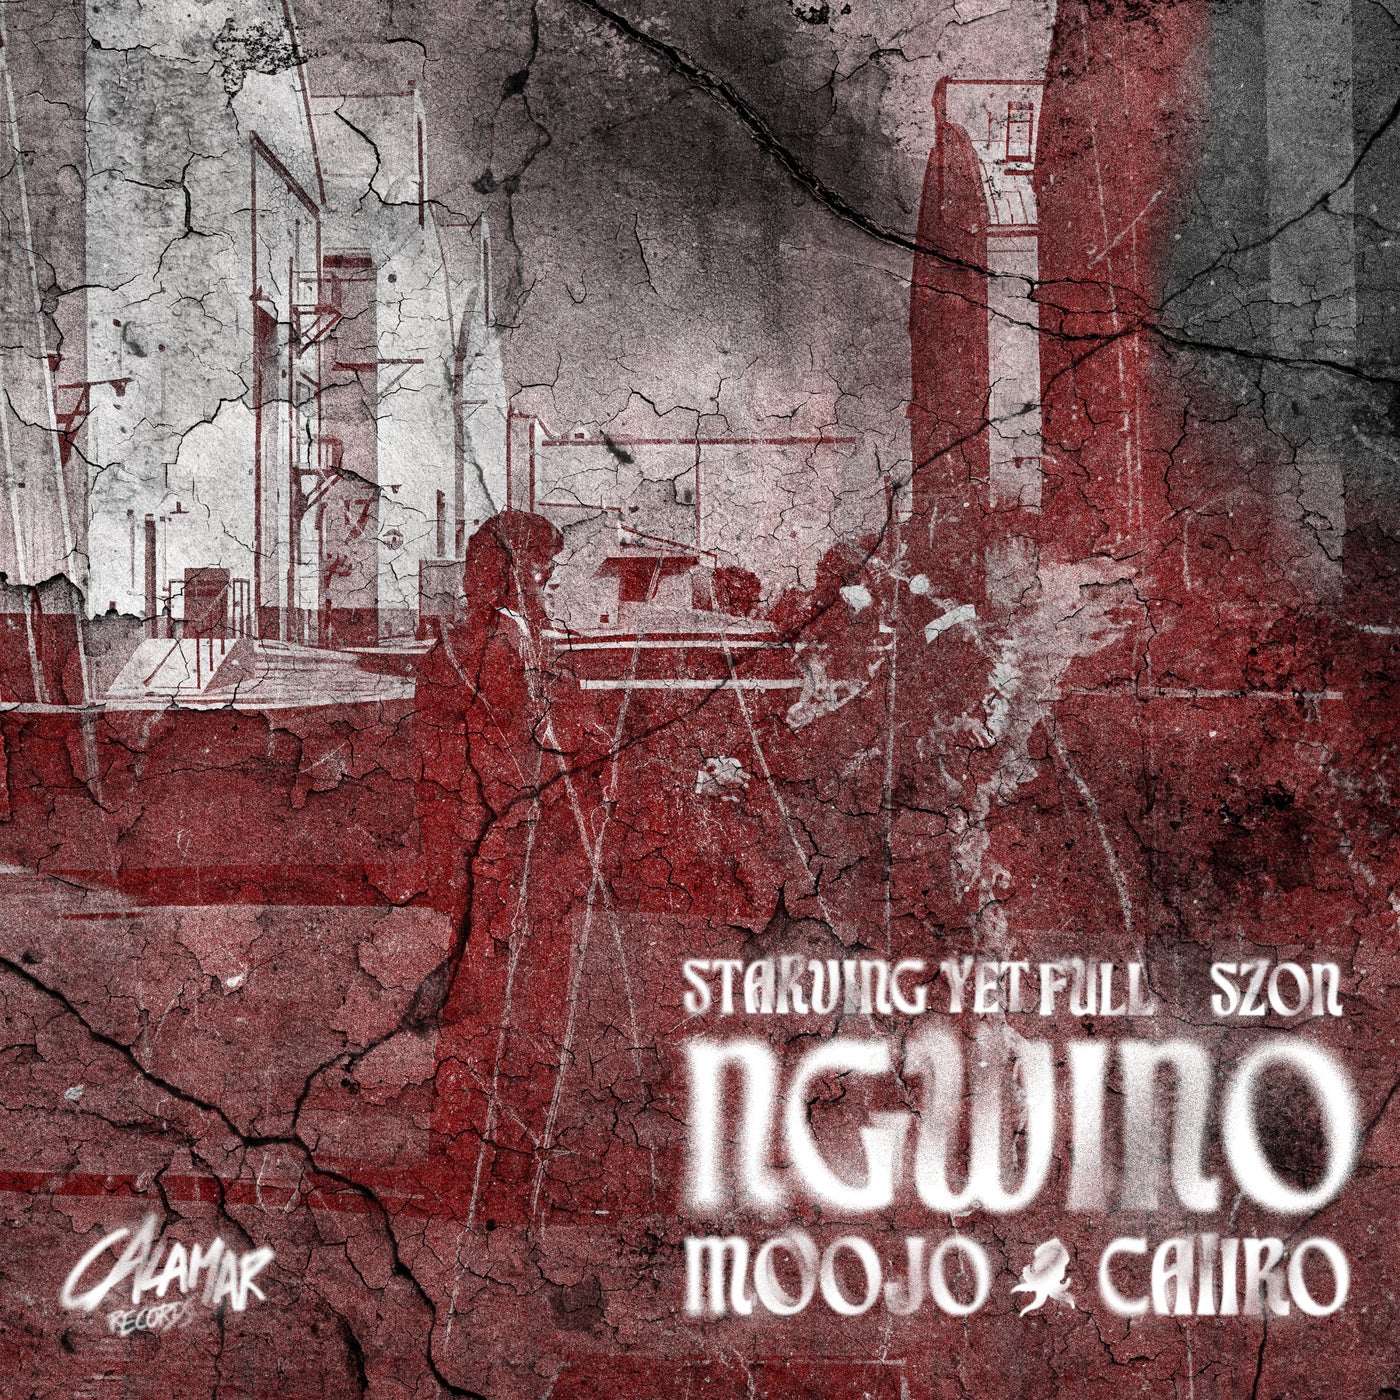 image cover: Starving Yet Full, Caiiro, Moojo - NGWINO on Calamar Records